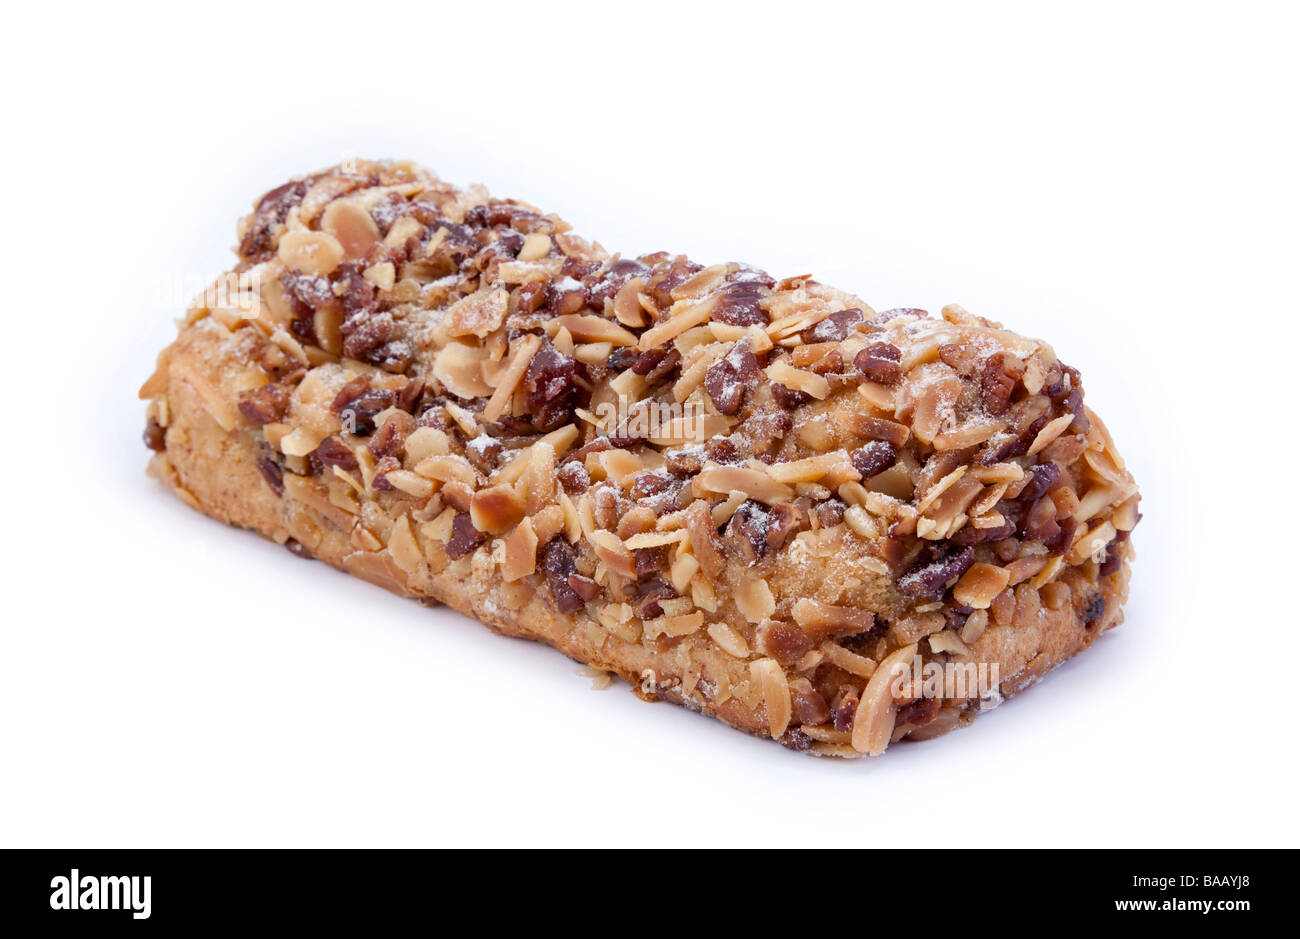 stollen fruit loaf / cake served on a plate Stock Photo